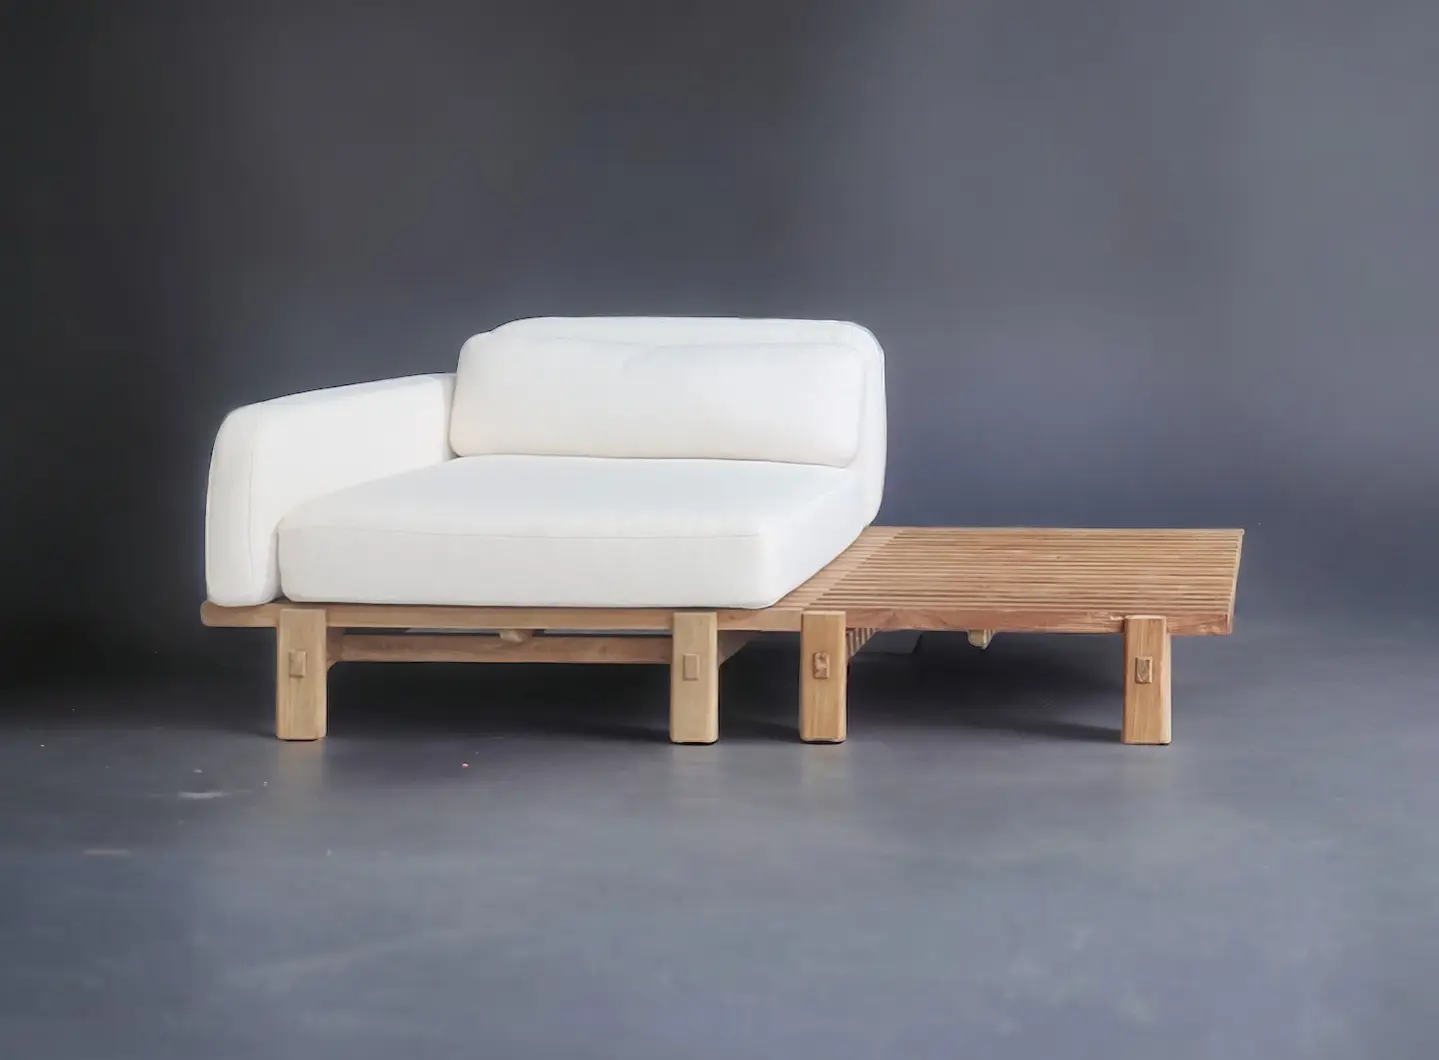 Modular and extension coffee table from Yubi Collection